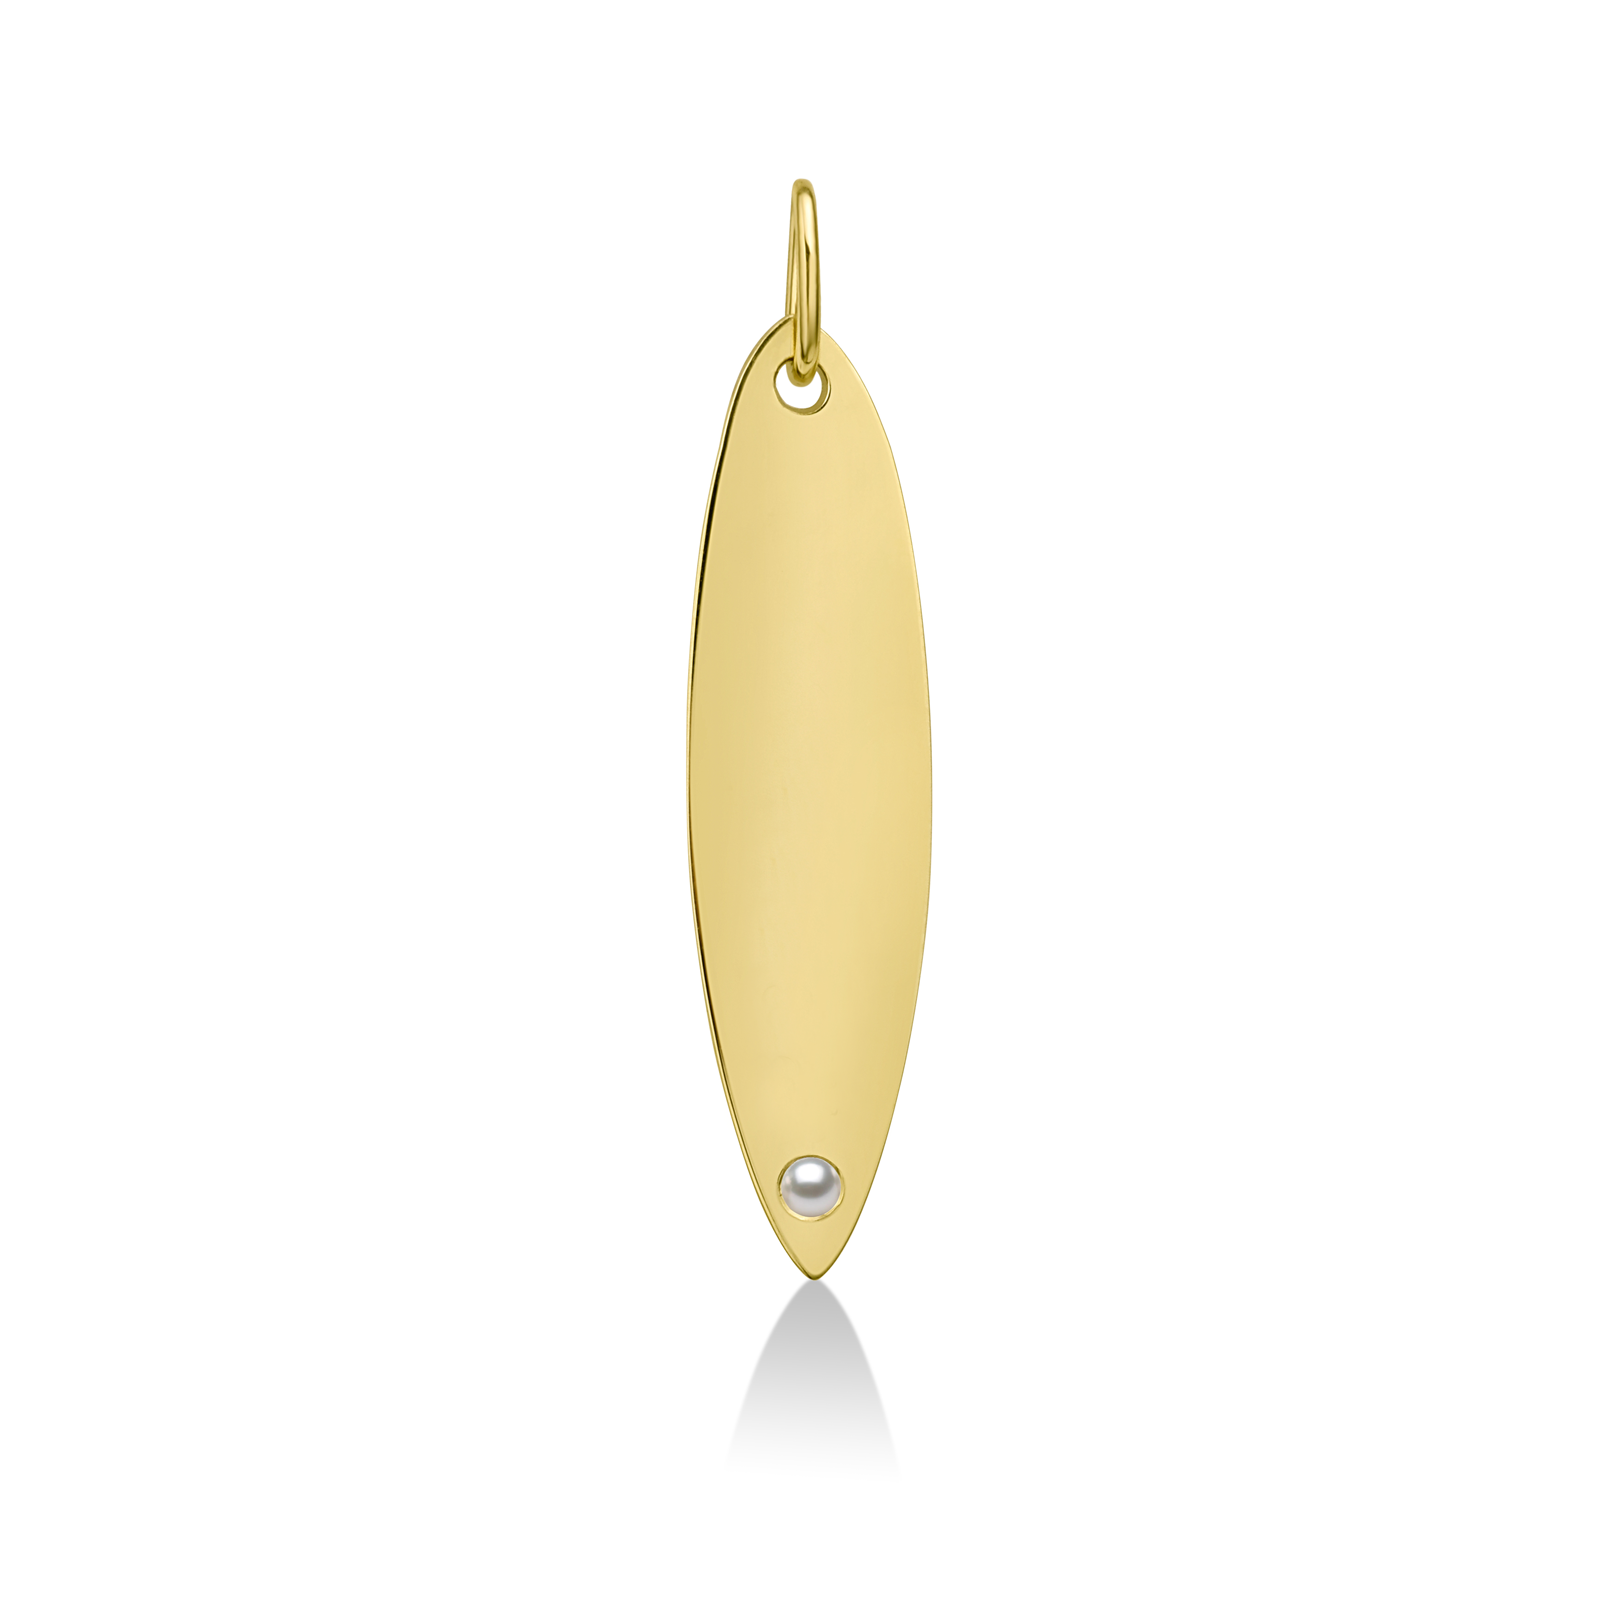 14k gold surfboard charm lock with pearl